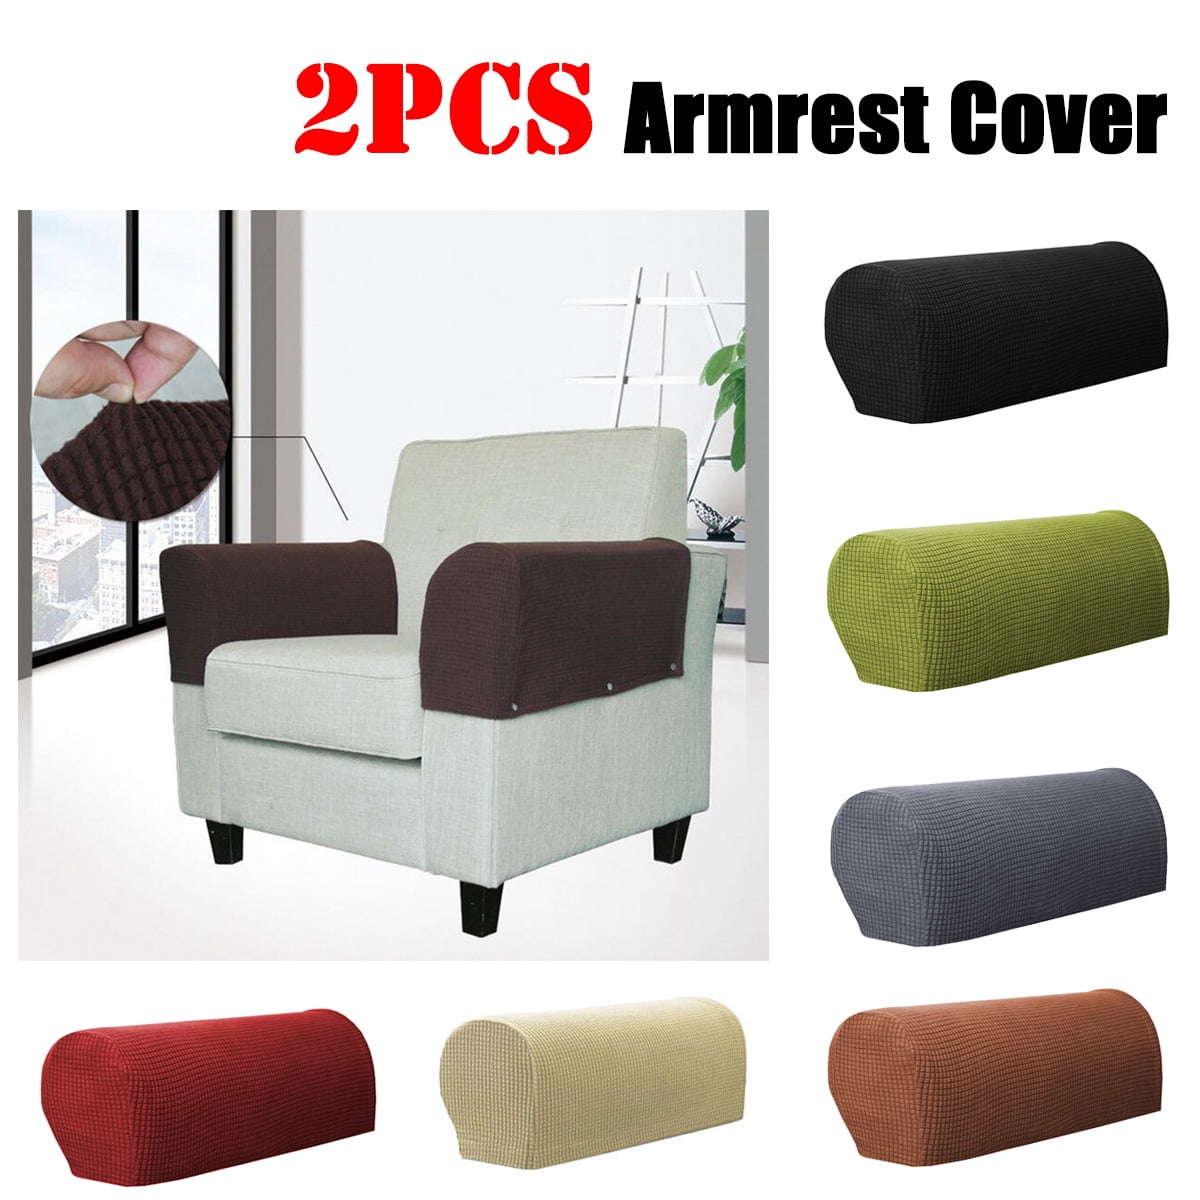 Armrest Cover Spandex Stretch Arm Cover for Recliners Sofas Chairs Loveseats 